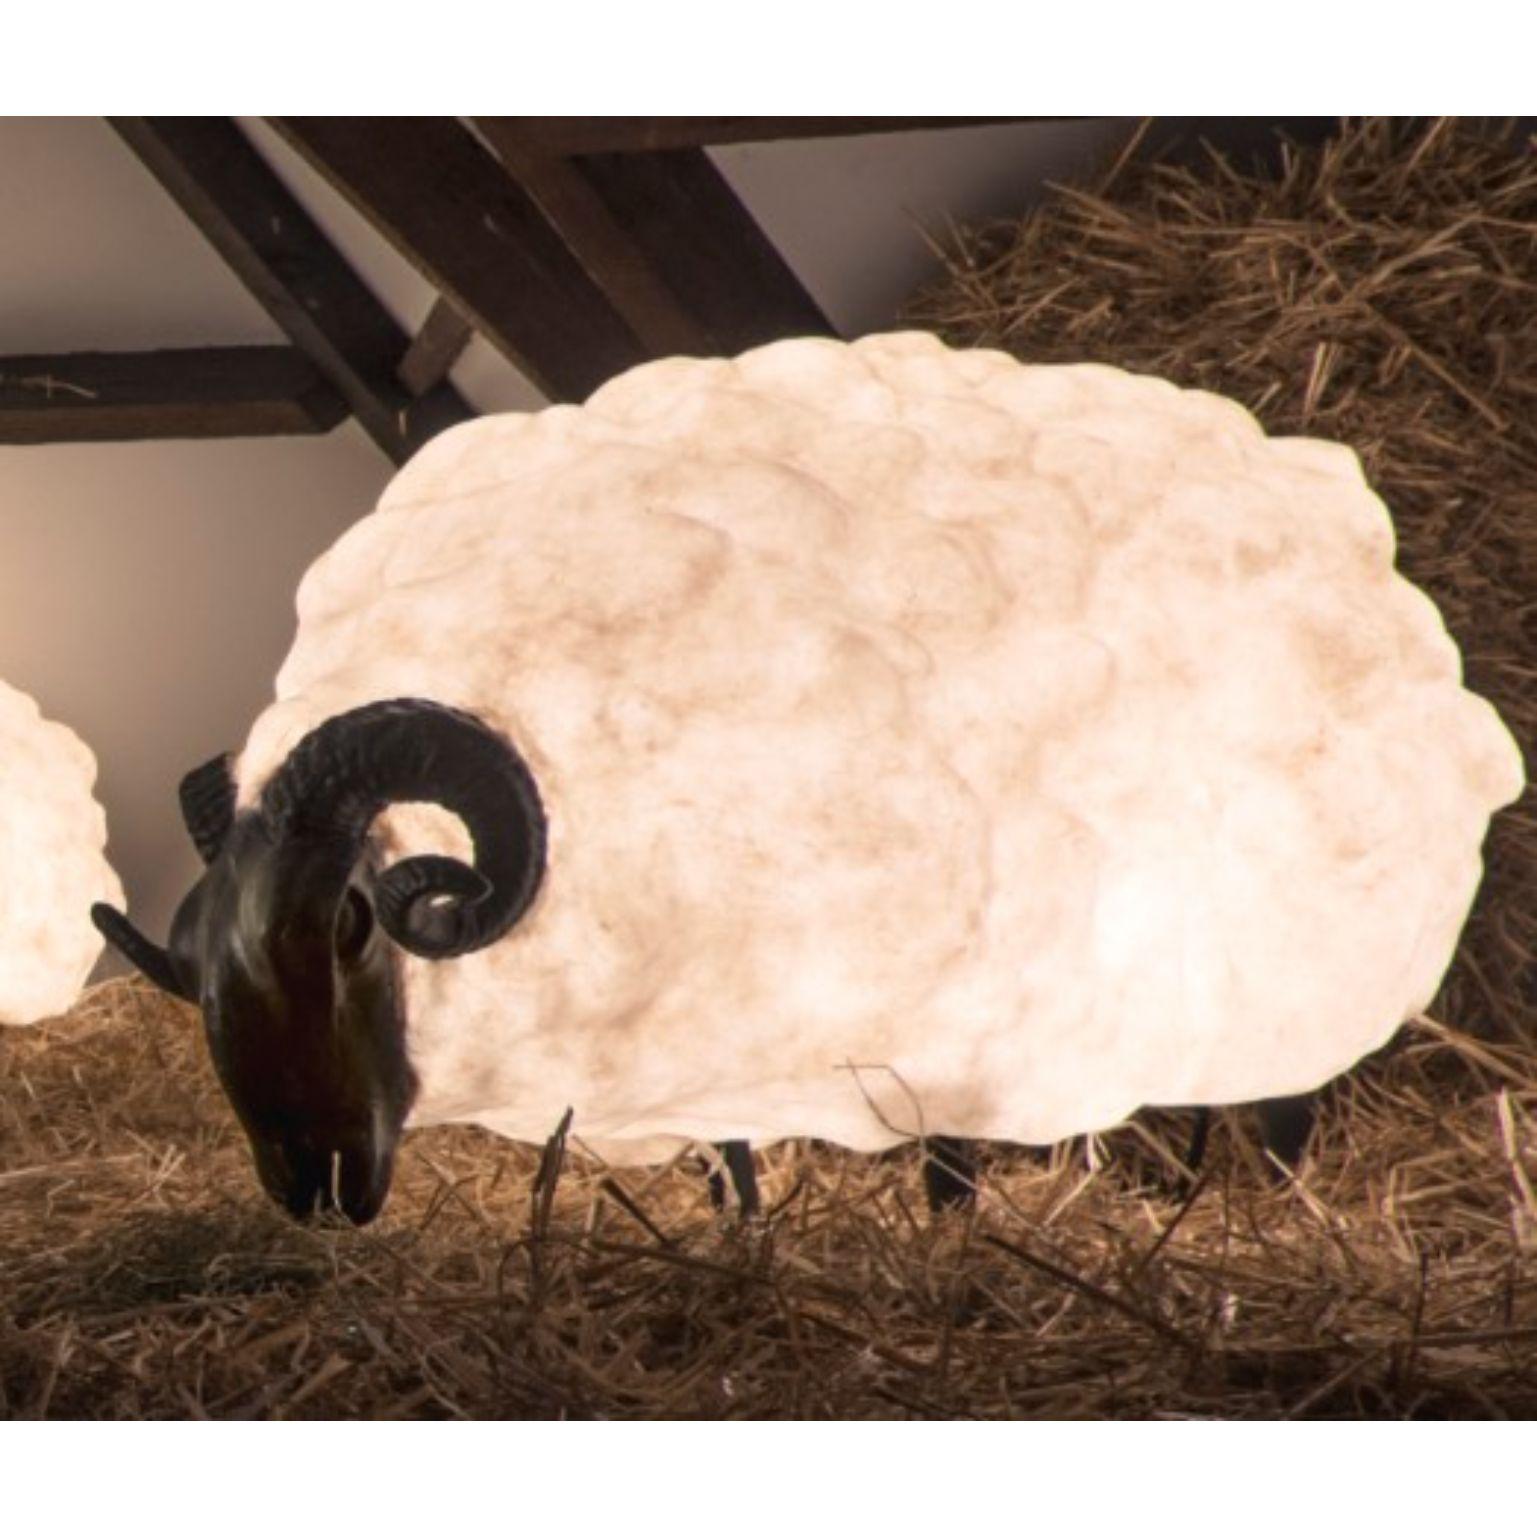 Molly - Light sculpture by Atelier Haute Cuisine
Dimensions: 65 x 11 x 75 cm
Materials: Fiberglass

All our lamps can be wired according to each country. If sold to the USA it will be wired for the USA for instance.

The cloned sheep Dolly